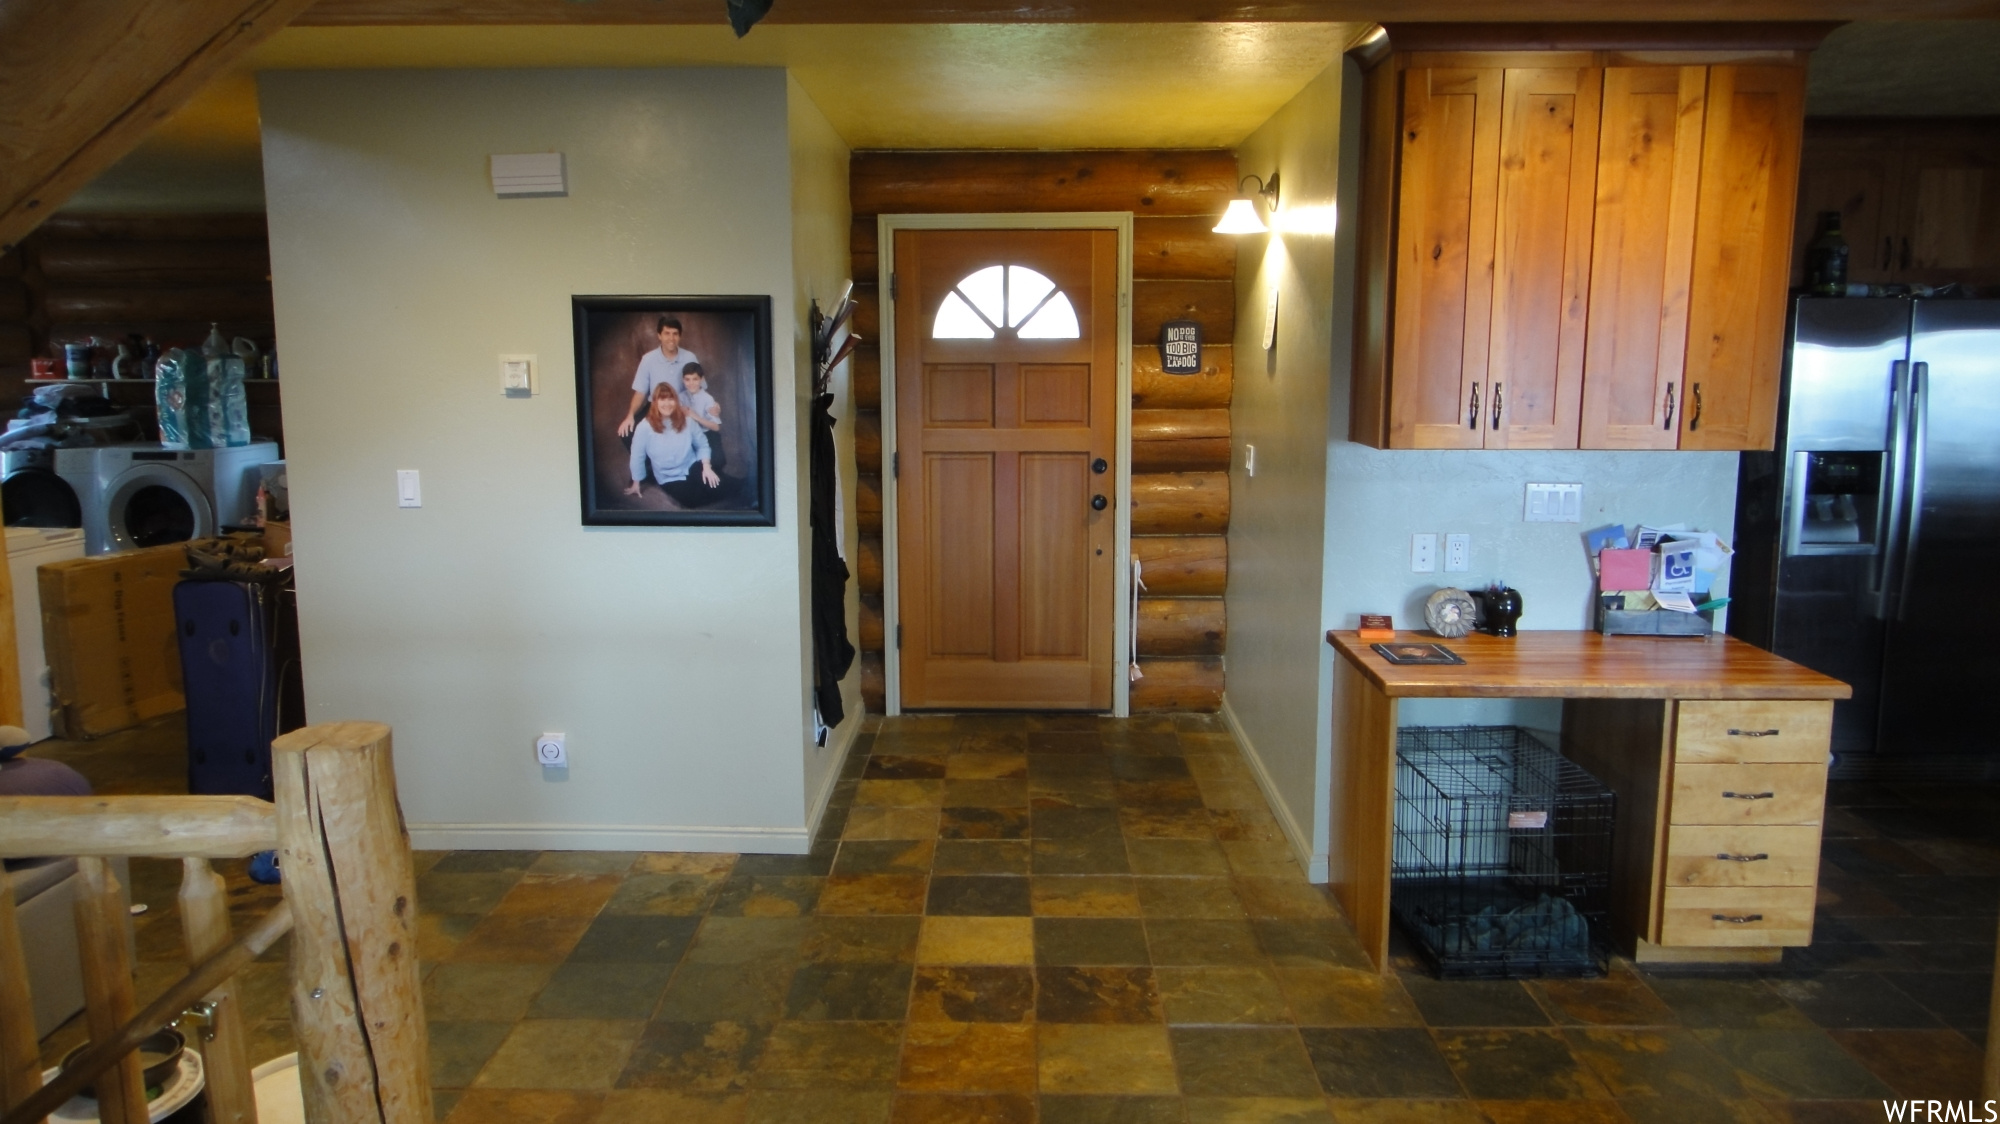 Tiled entryway with rustic walls.